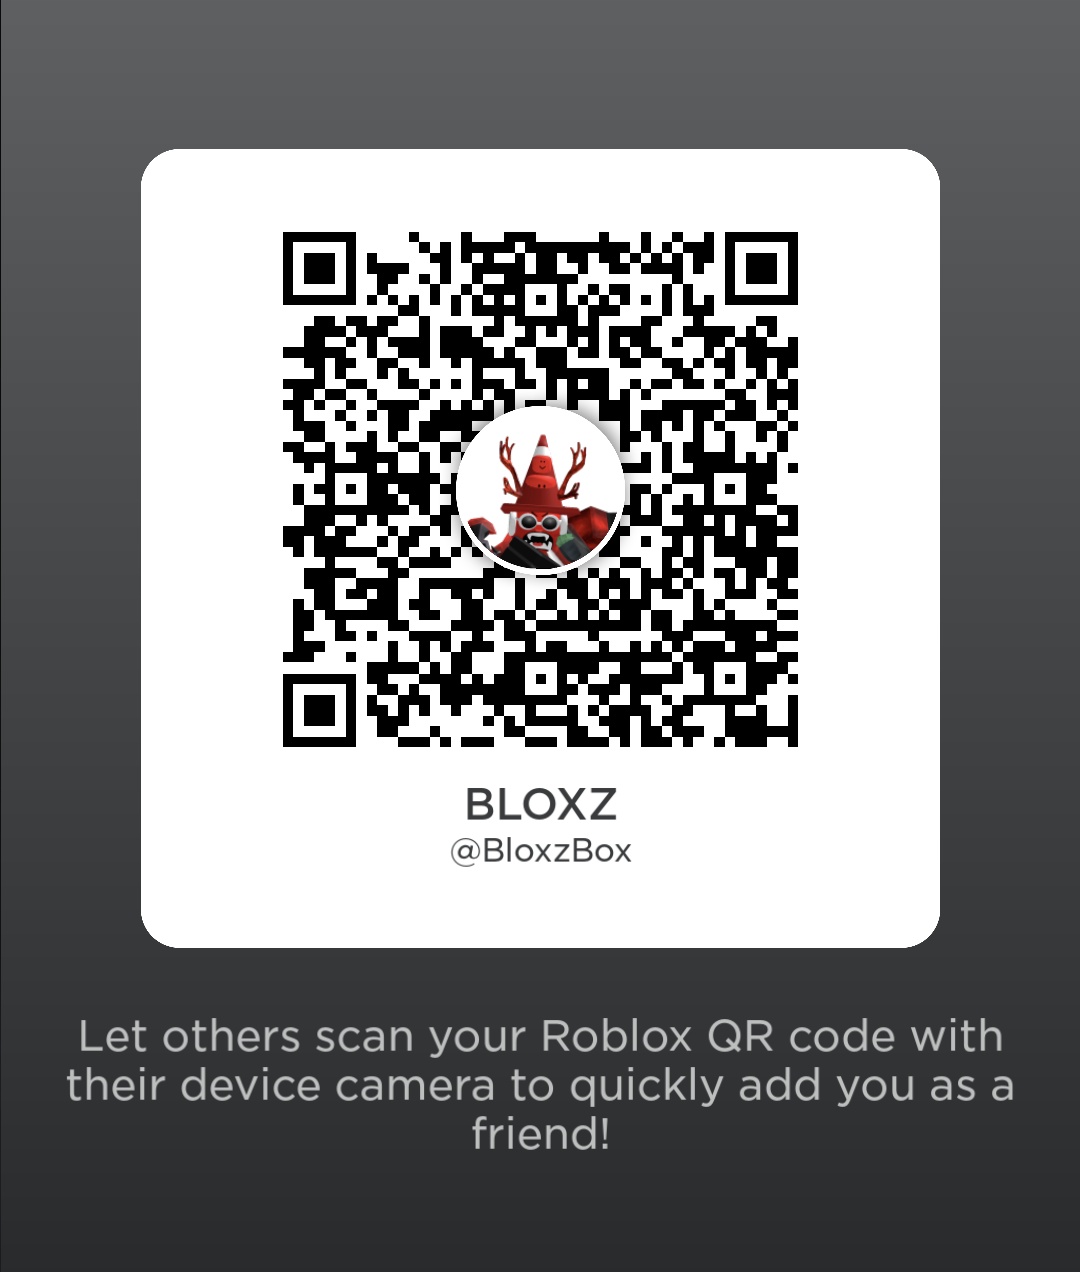 Roblox seems to of added a QR Code Log In : r/roblox